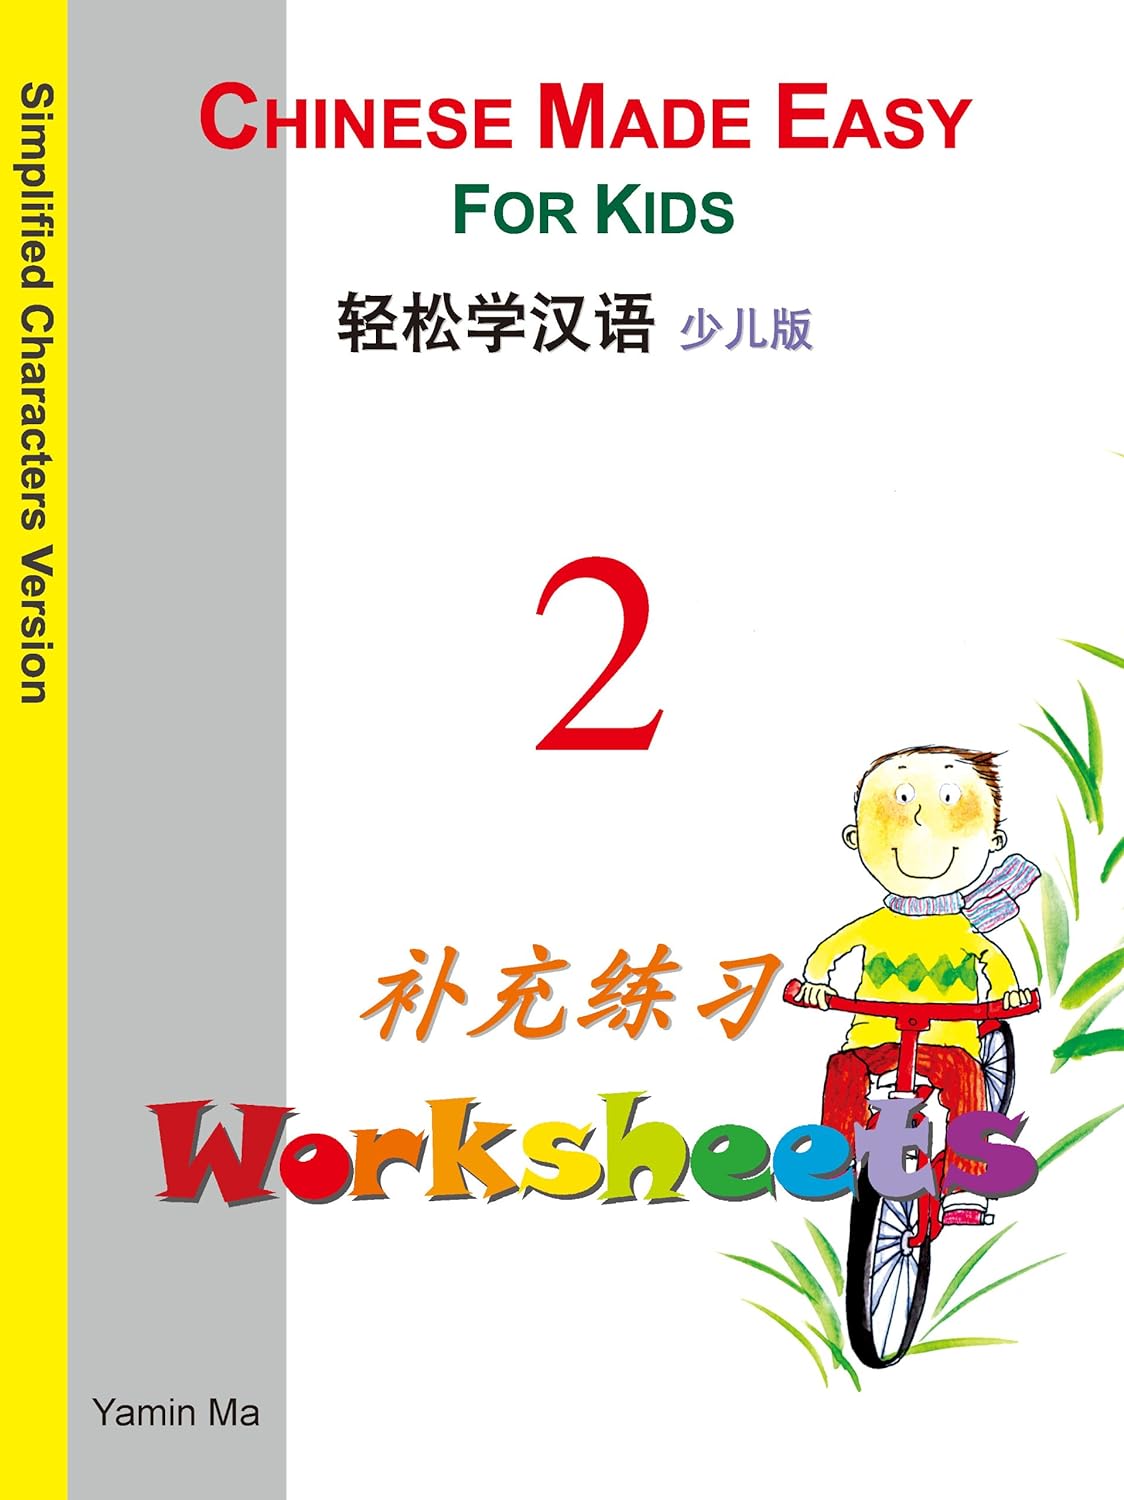 Chinese Made Easy for Kids (Simplified) Worksheets 2